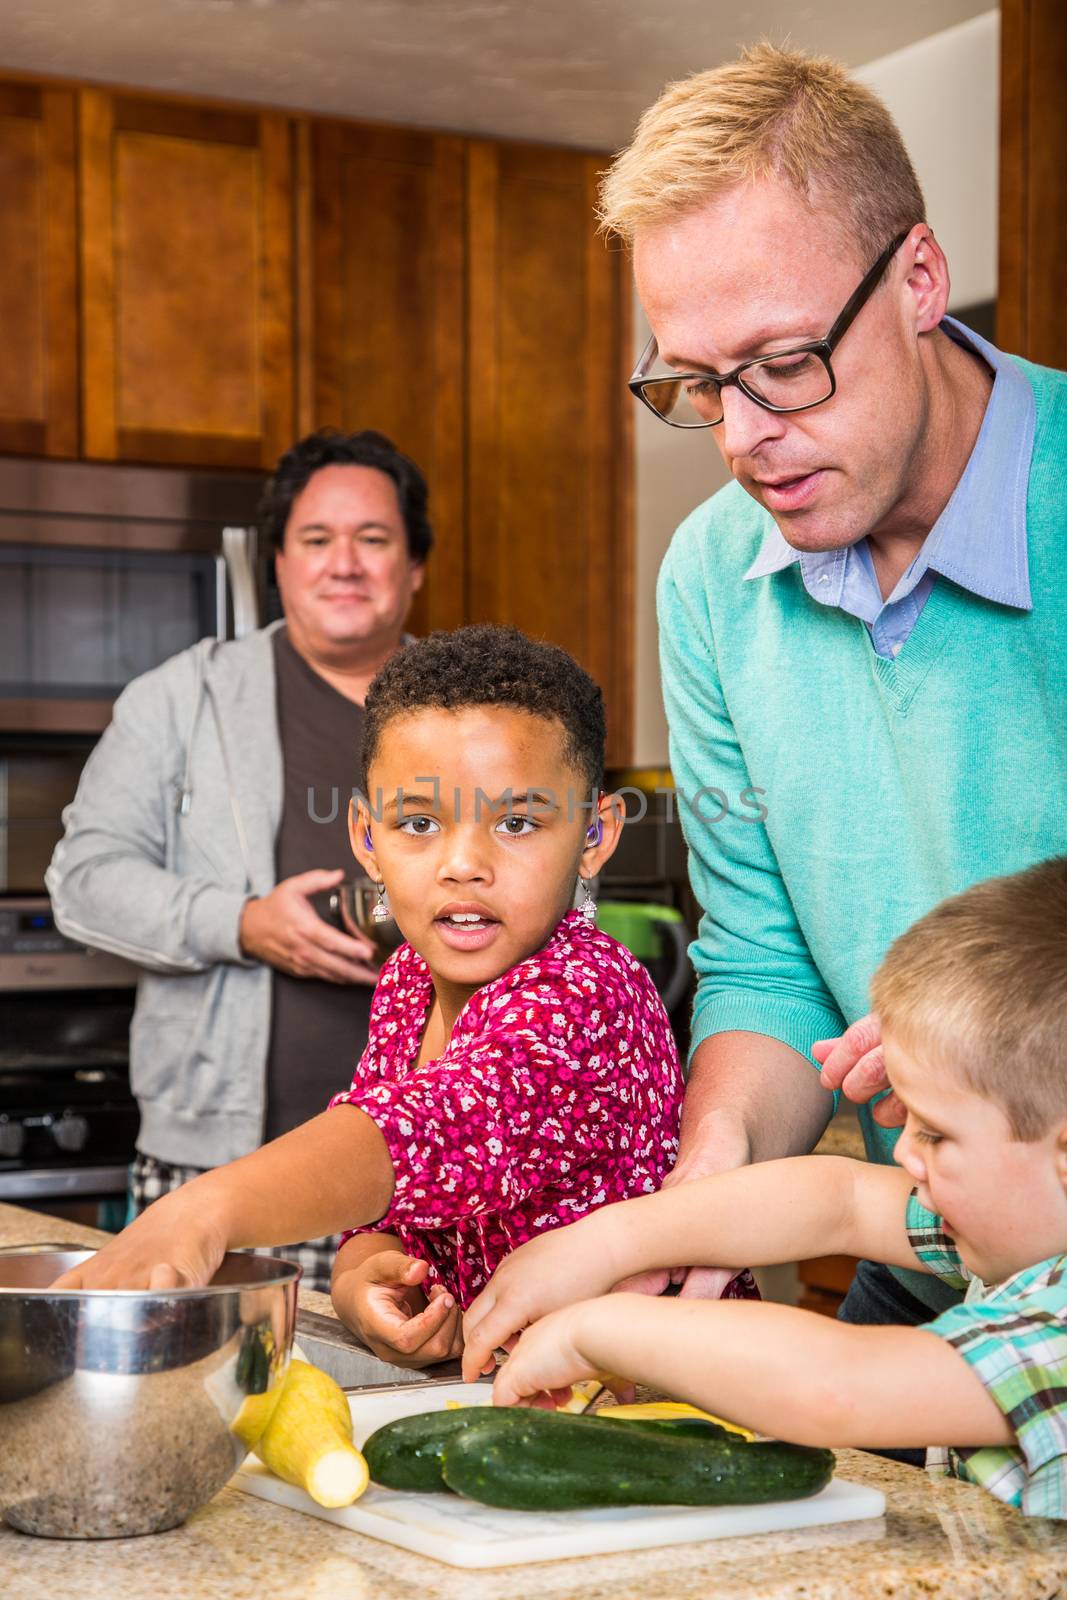 Two dads in kitchen cook with children